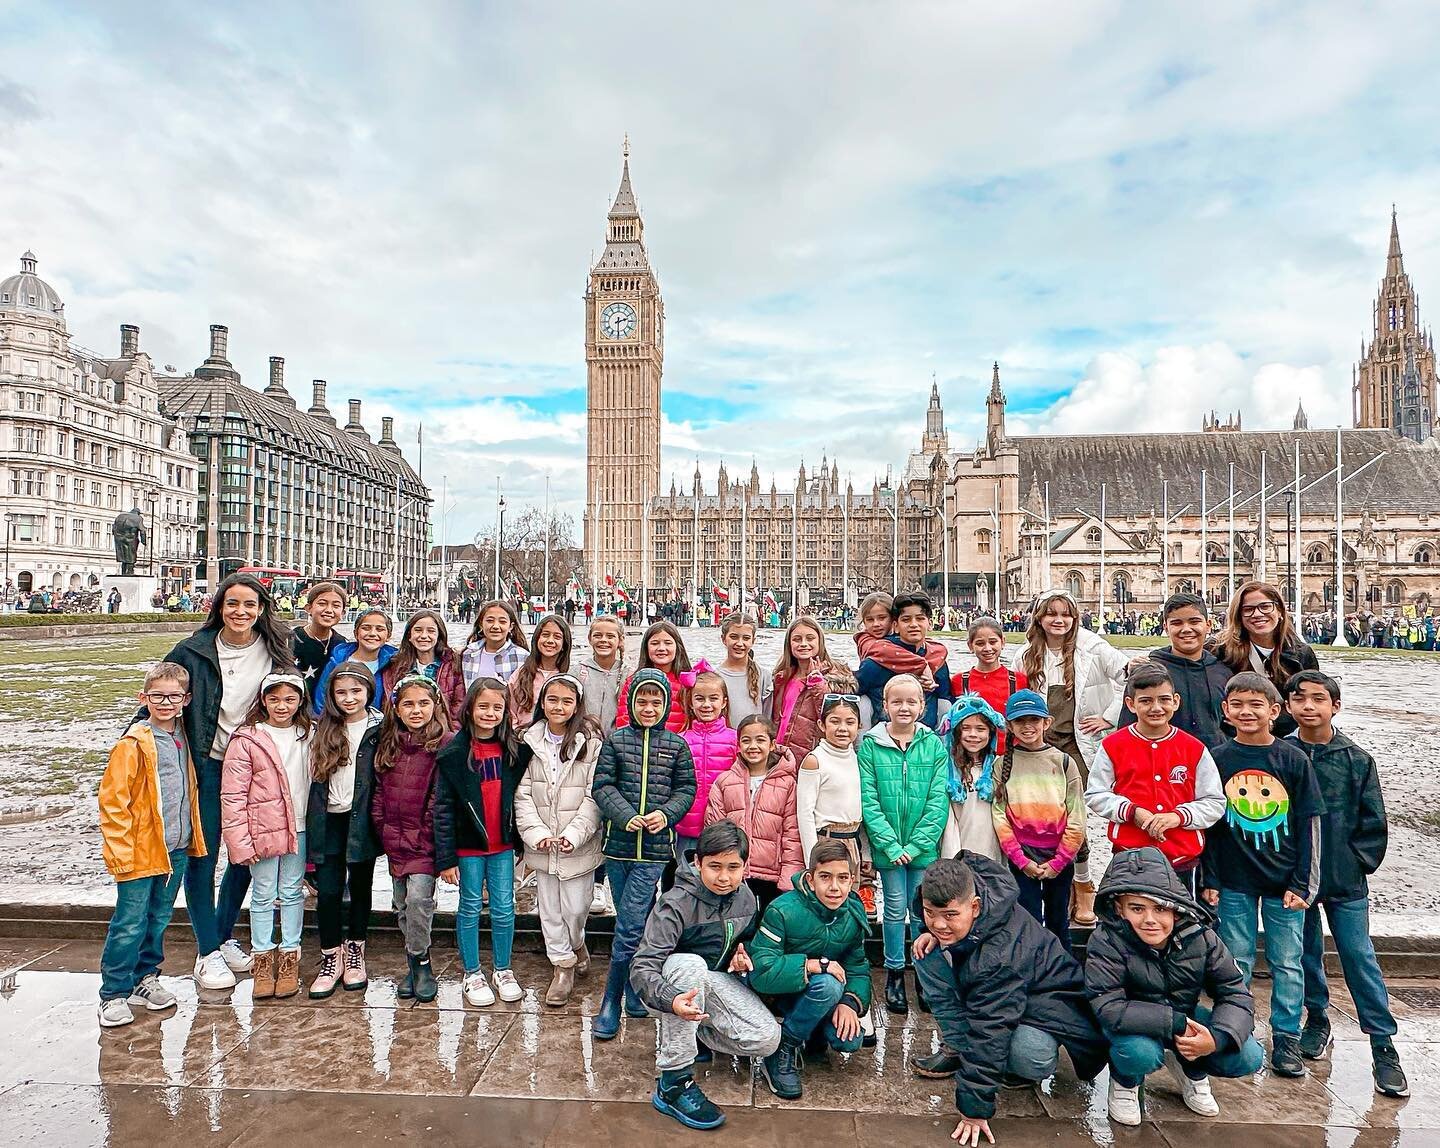 We came, we saw, we conquered! 50 brilliant honor students, 30 proud siblings, and 100 brave adults took over the streets of London and left our mark on this amazing city. A big thank you to our Head of School, Mr. Gispert, for always supporting our 